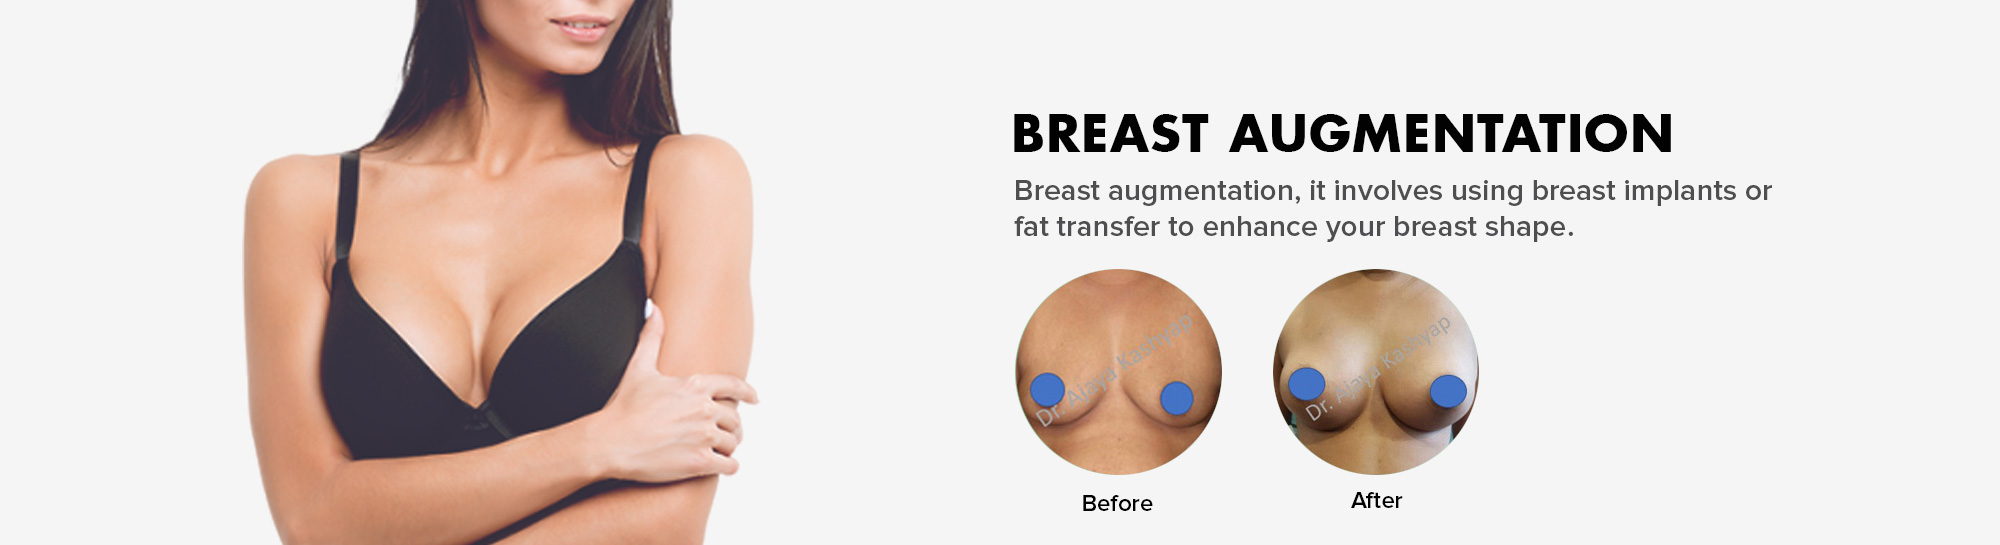 Breast Reduction in Delhi – Surgery Procedure for Smaller Breasts